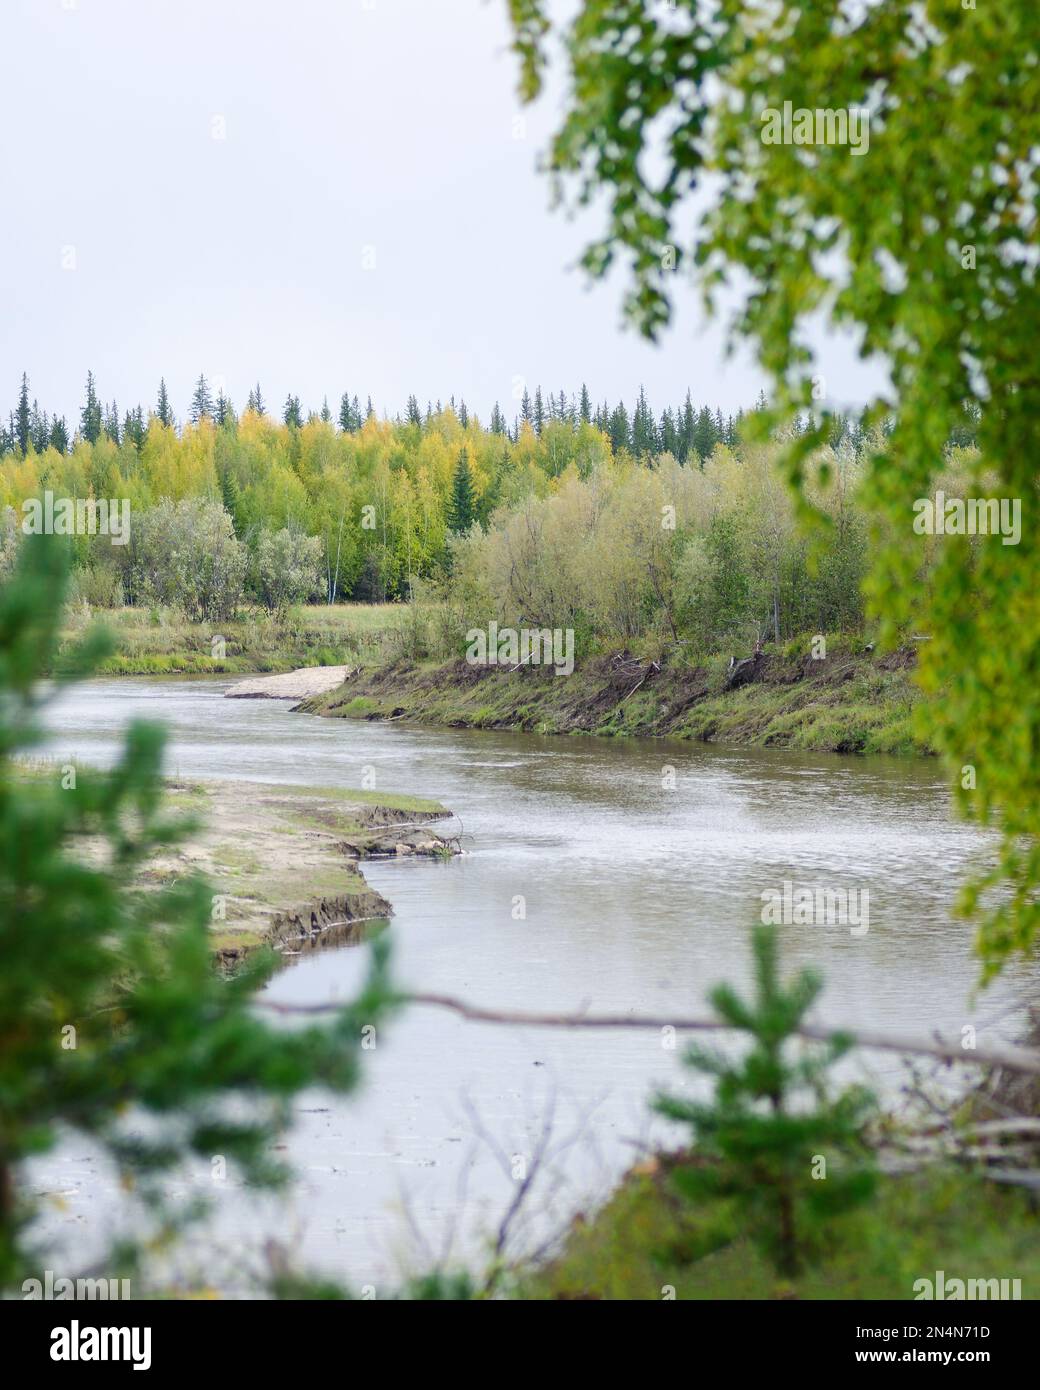 The turn of a small Northern river with yellow and green trees on the banks is visible through the fuzzy leaves of trees in the autumn in the North of Stock Photo